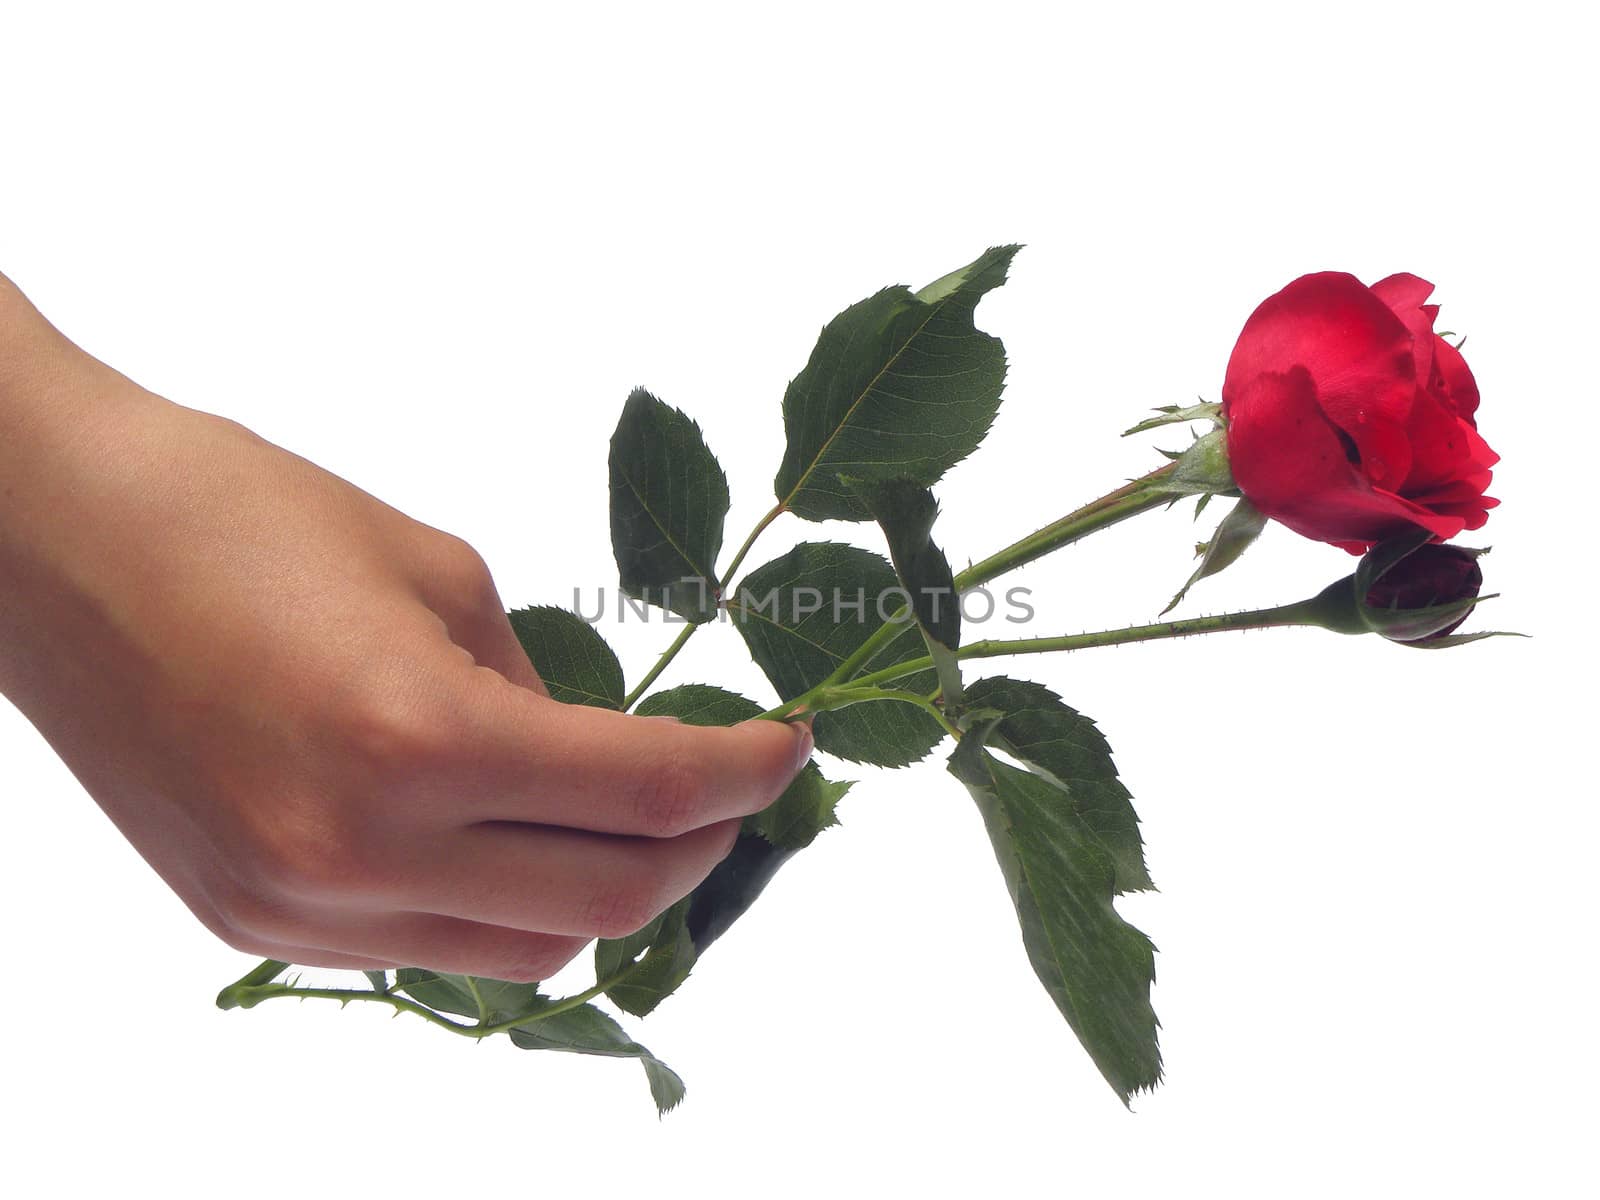 A beautiful single rose held in the hand.